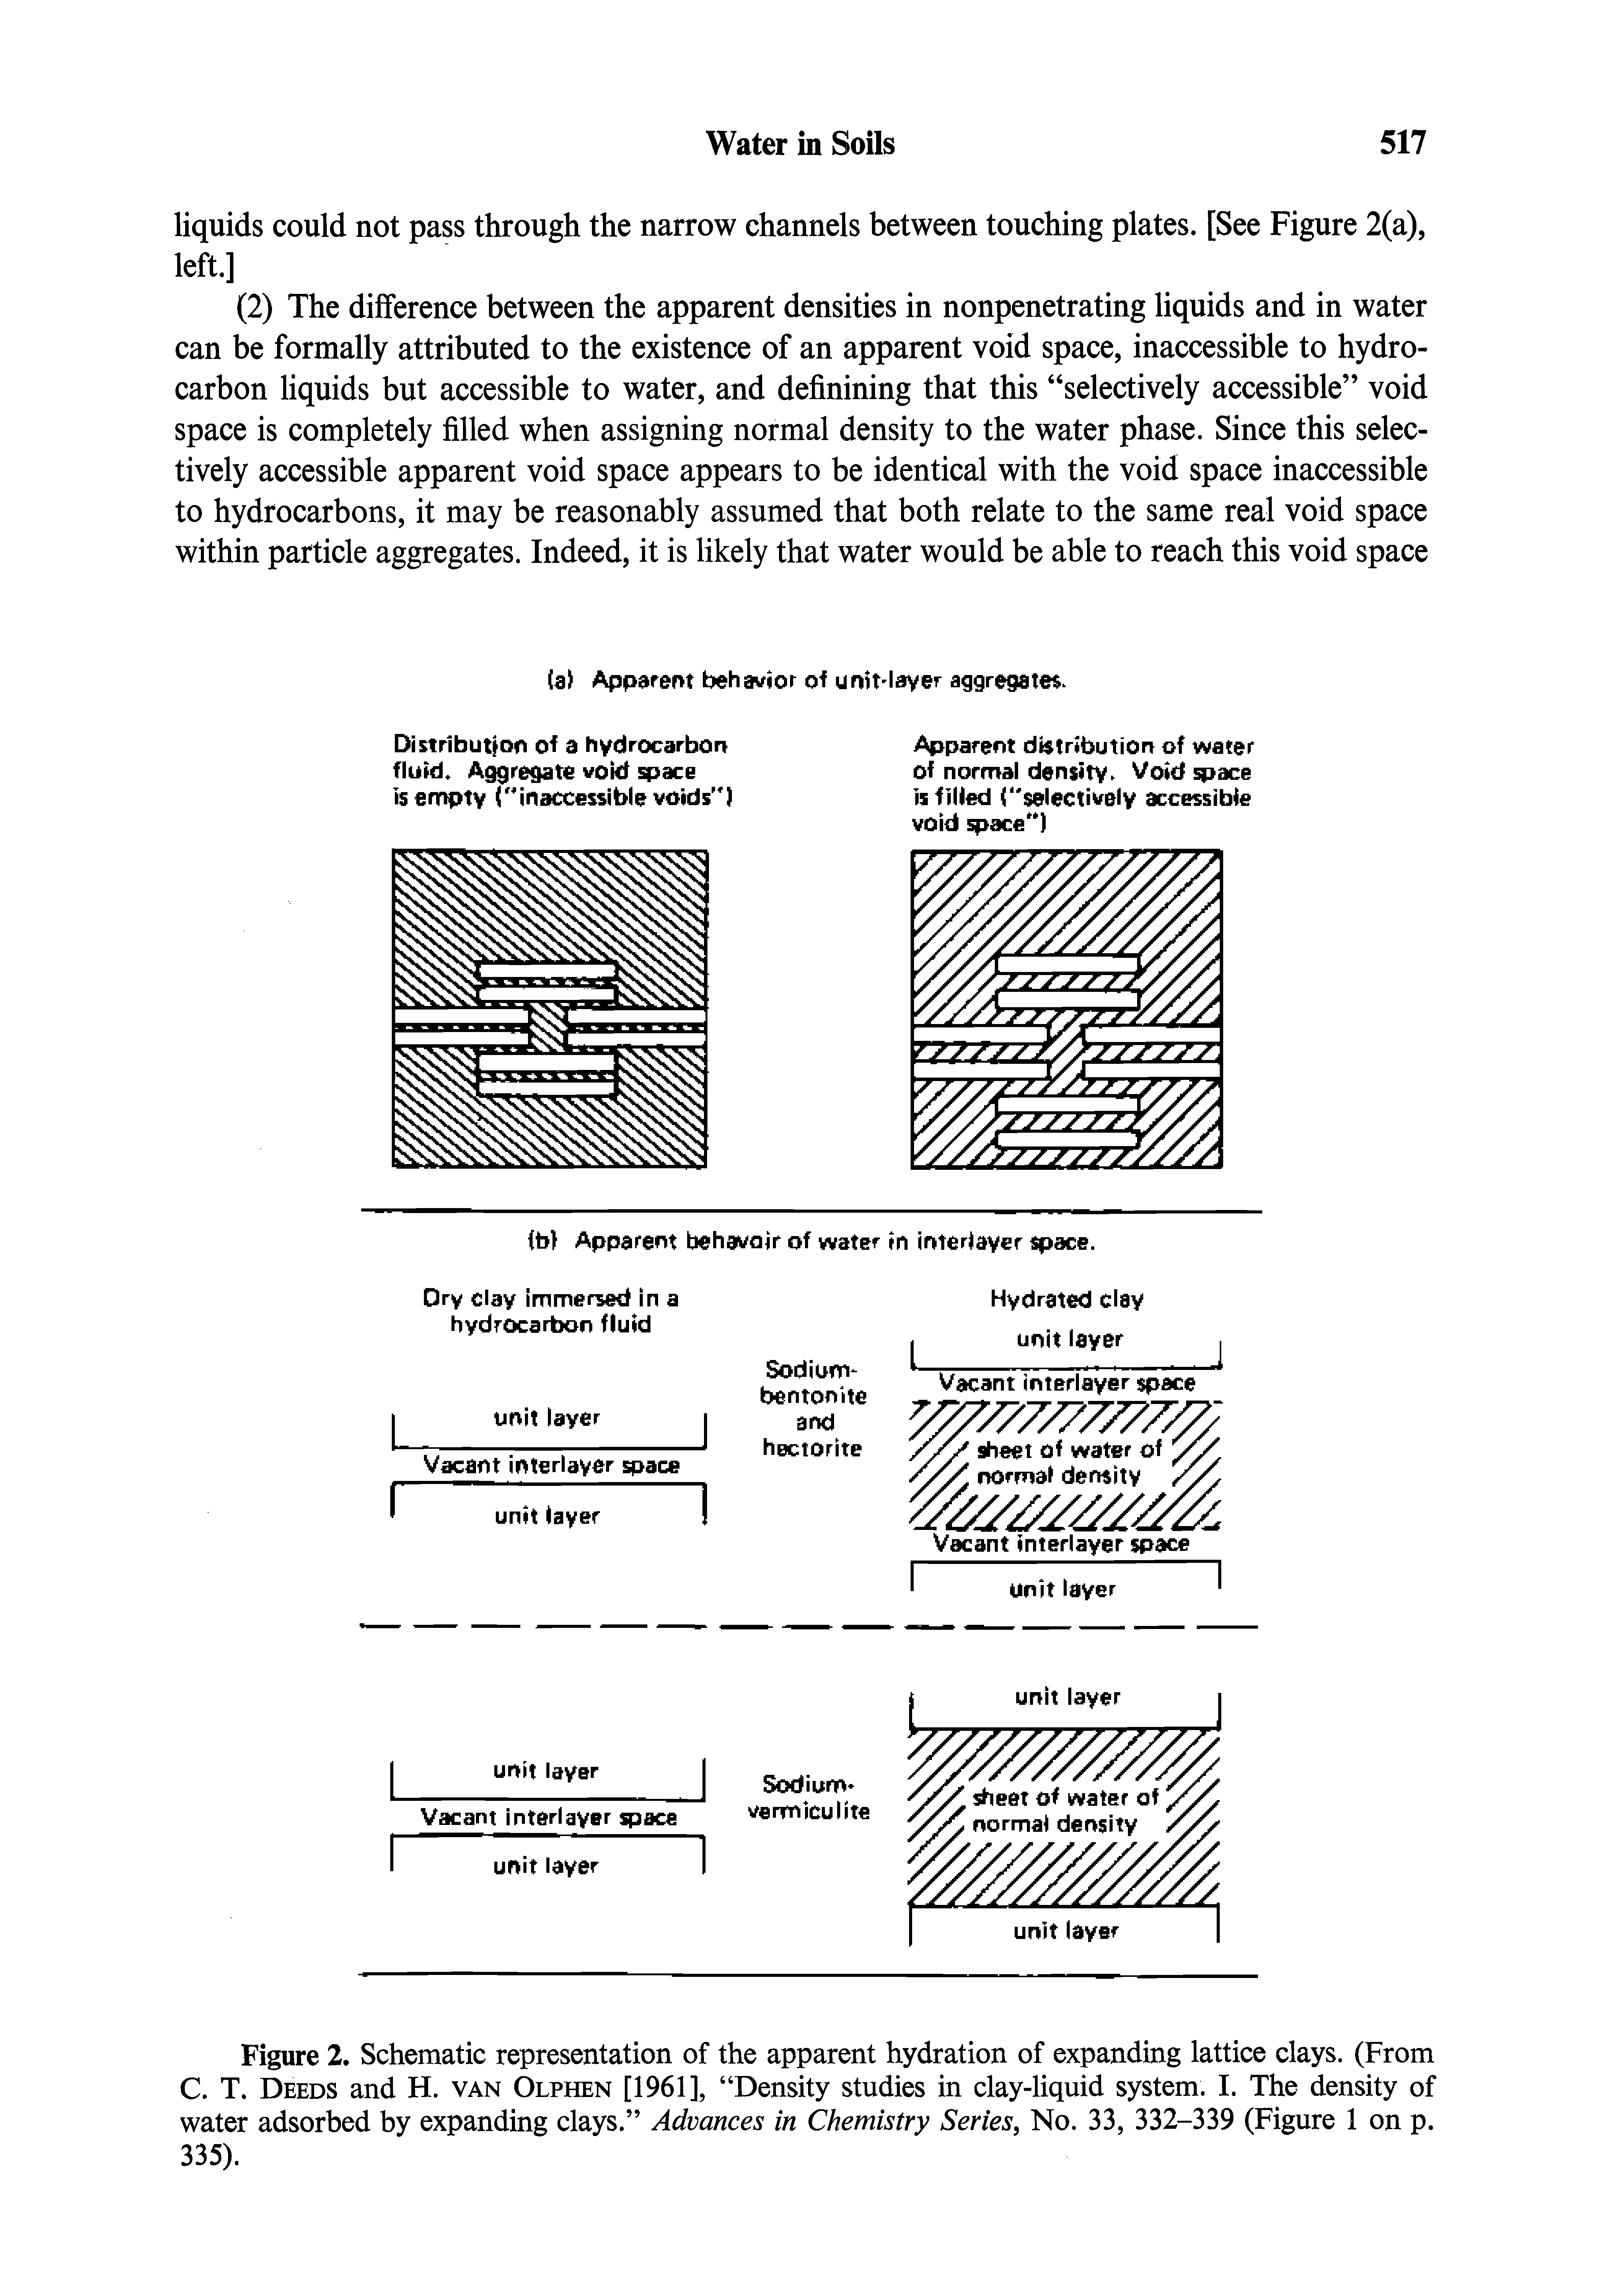 Figure 2. Schematic representation of the apparent hydration of expanding lattice clays. (From C. T. Deeds and H. van Olphen [1961], Density studies in clay-liquid system. I. The density of water adsorbed by expanding clays. Advances in Chemistry Series, No. 33, 332-339 (Figure 1 on p. 335).